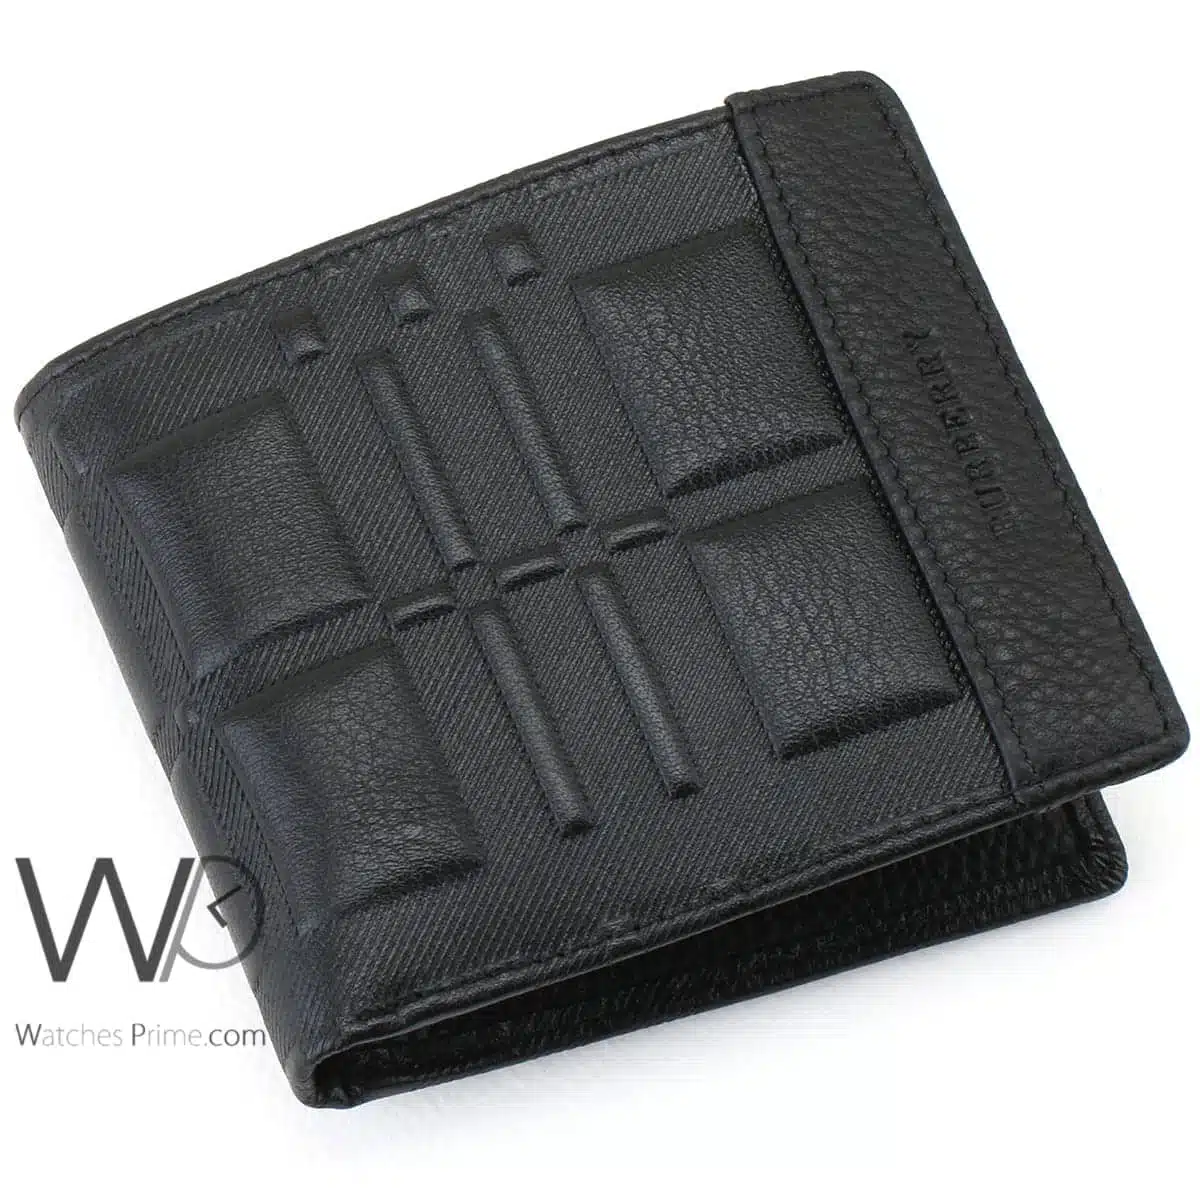 Burberry Wallet Black Leather For Men | Watches Prime